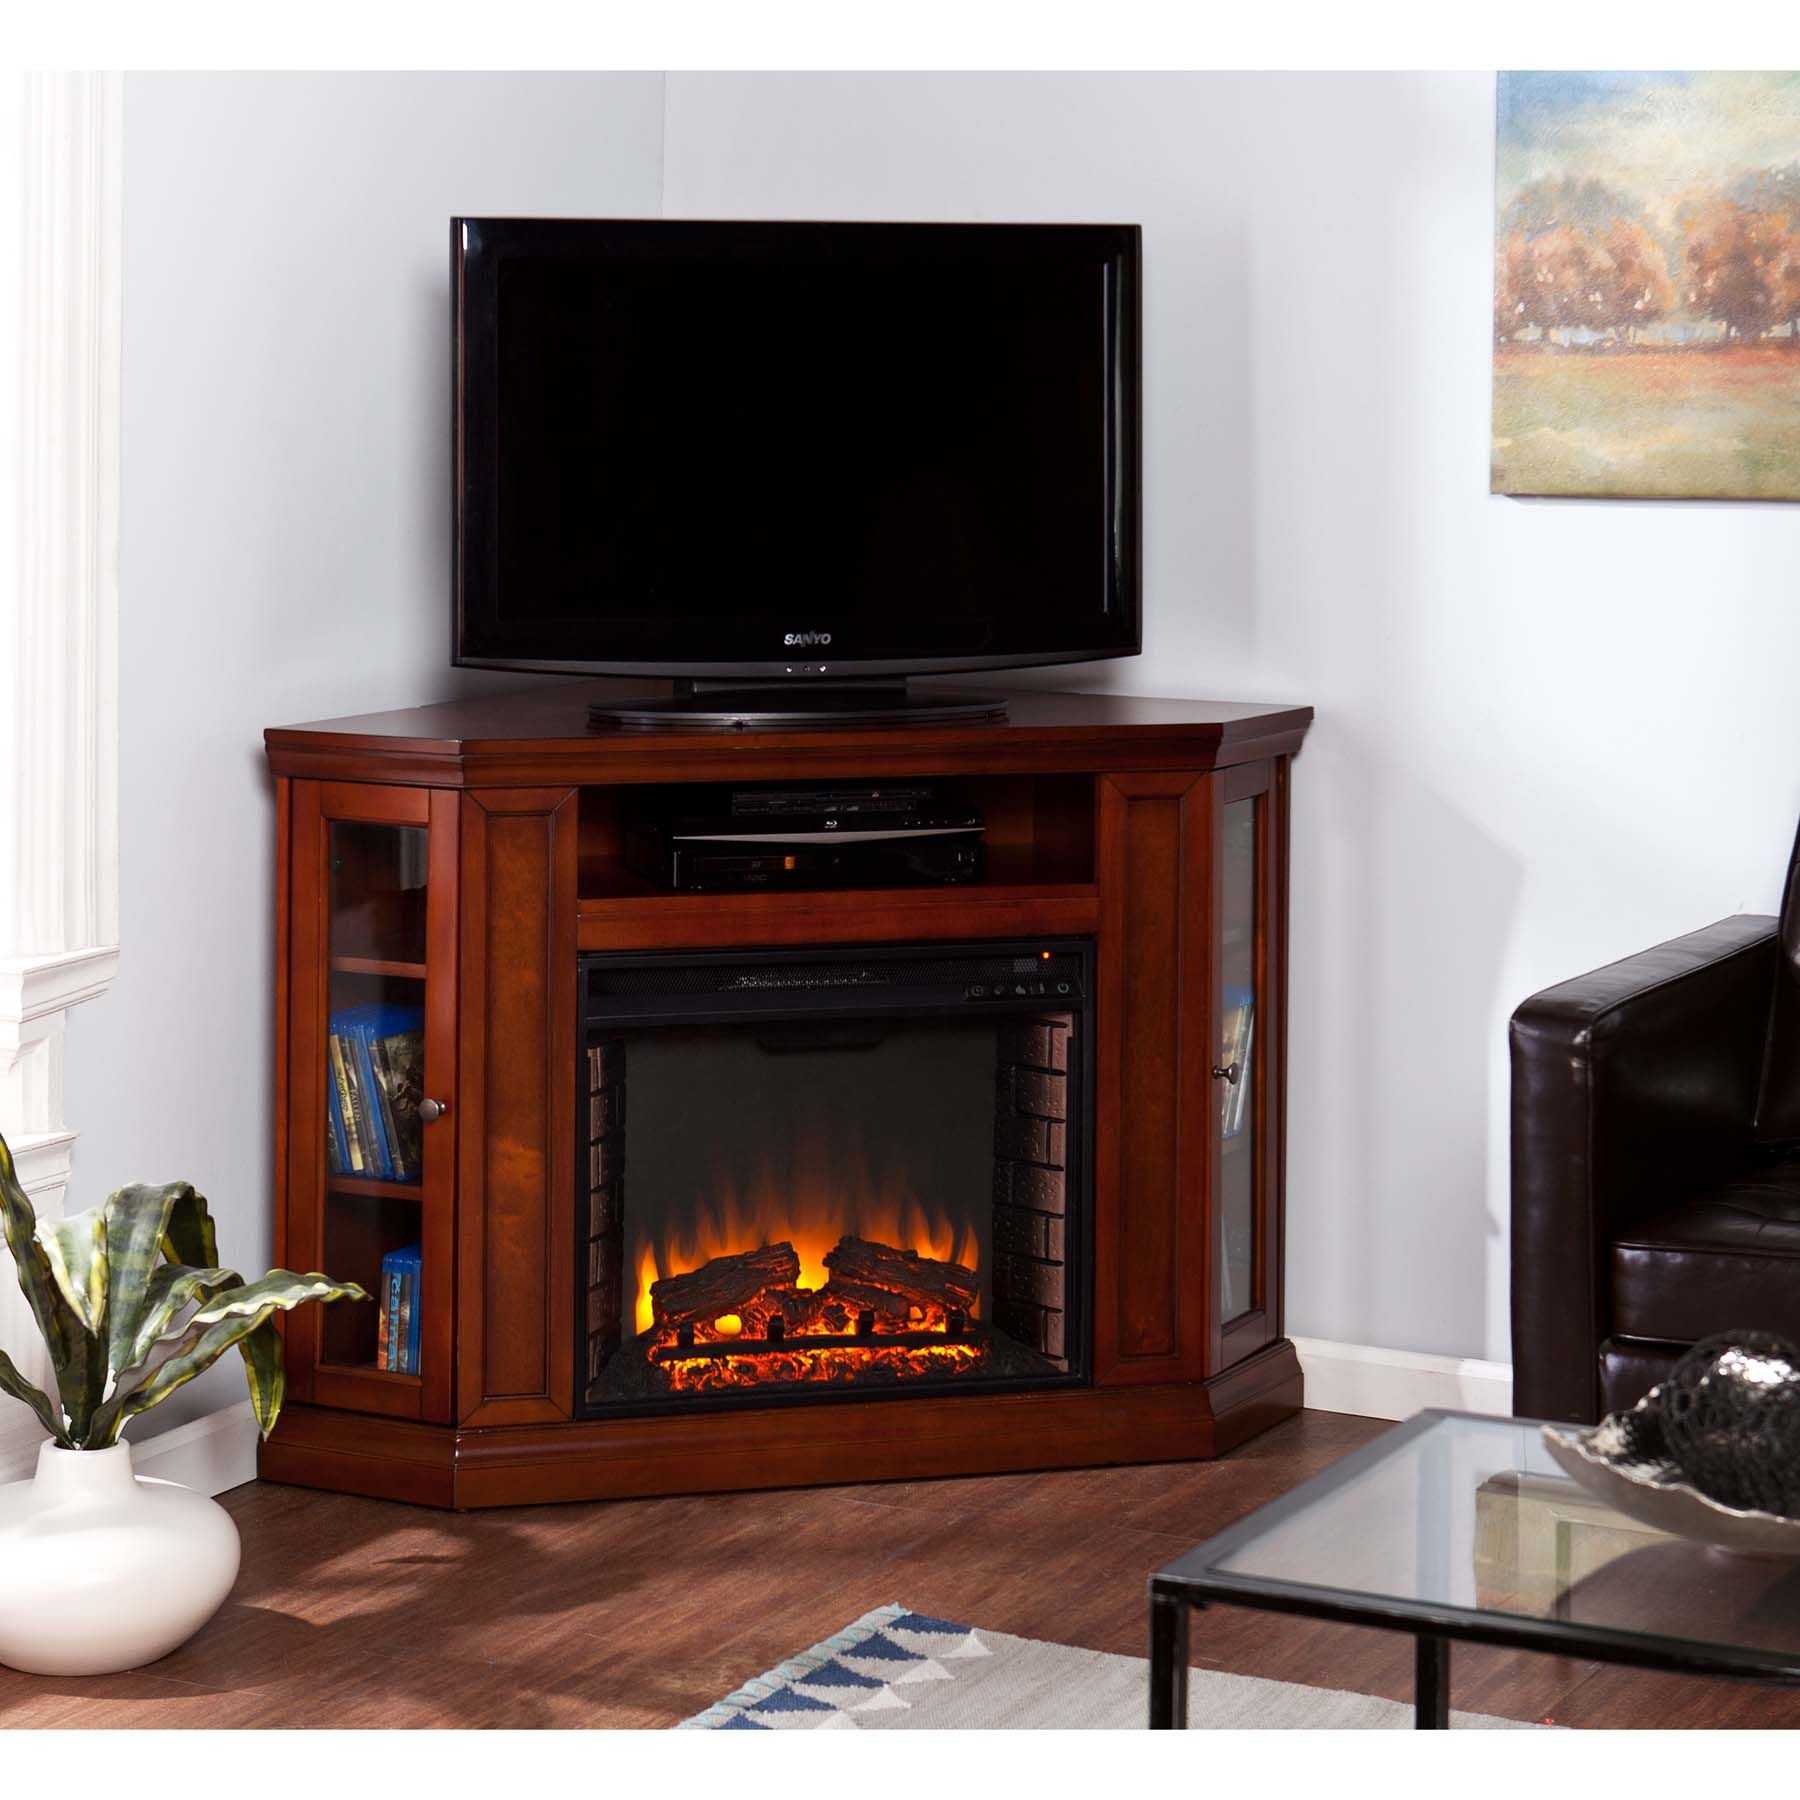 Media Center with Fireplace Best Of 42 Best Rustic Fireplace Images